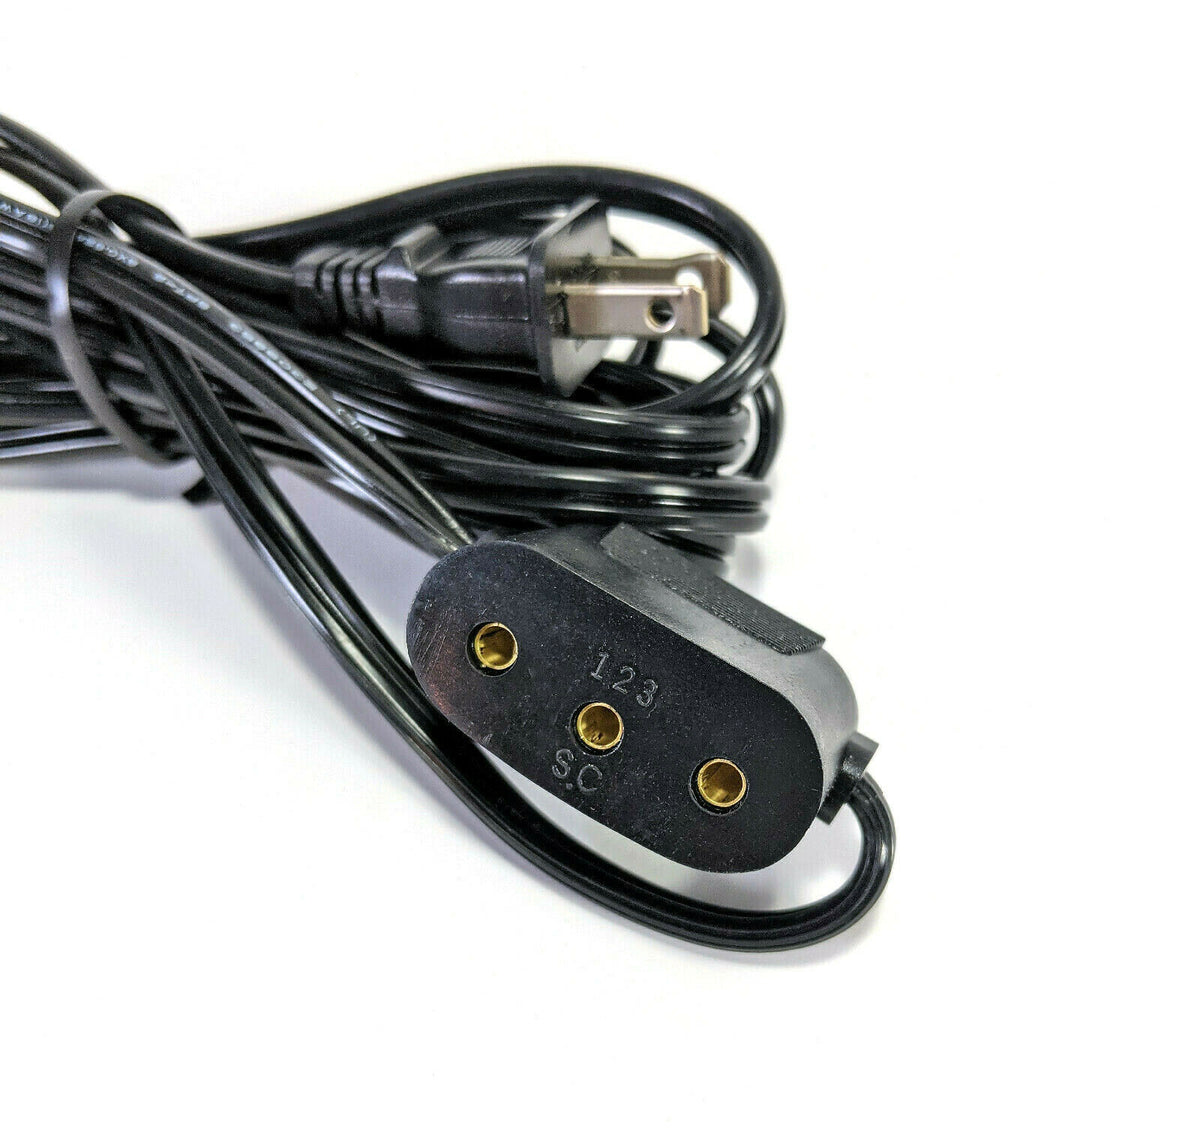 Power Lead Cord #122 (Single Lead) for Singer 15-30, 15-91 Sewing Machines